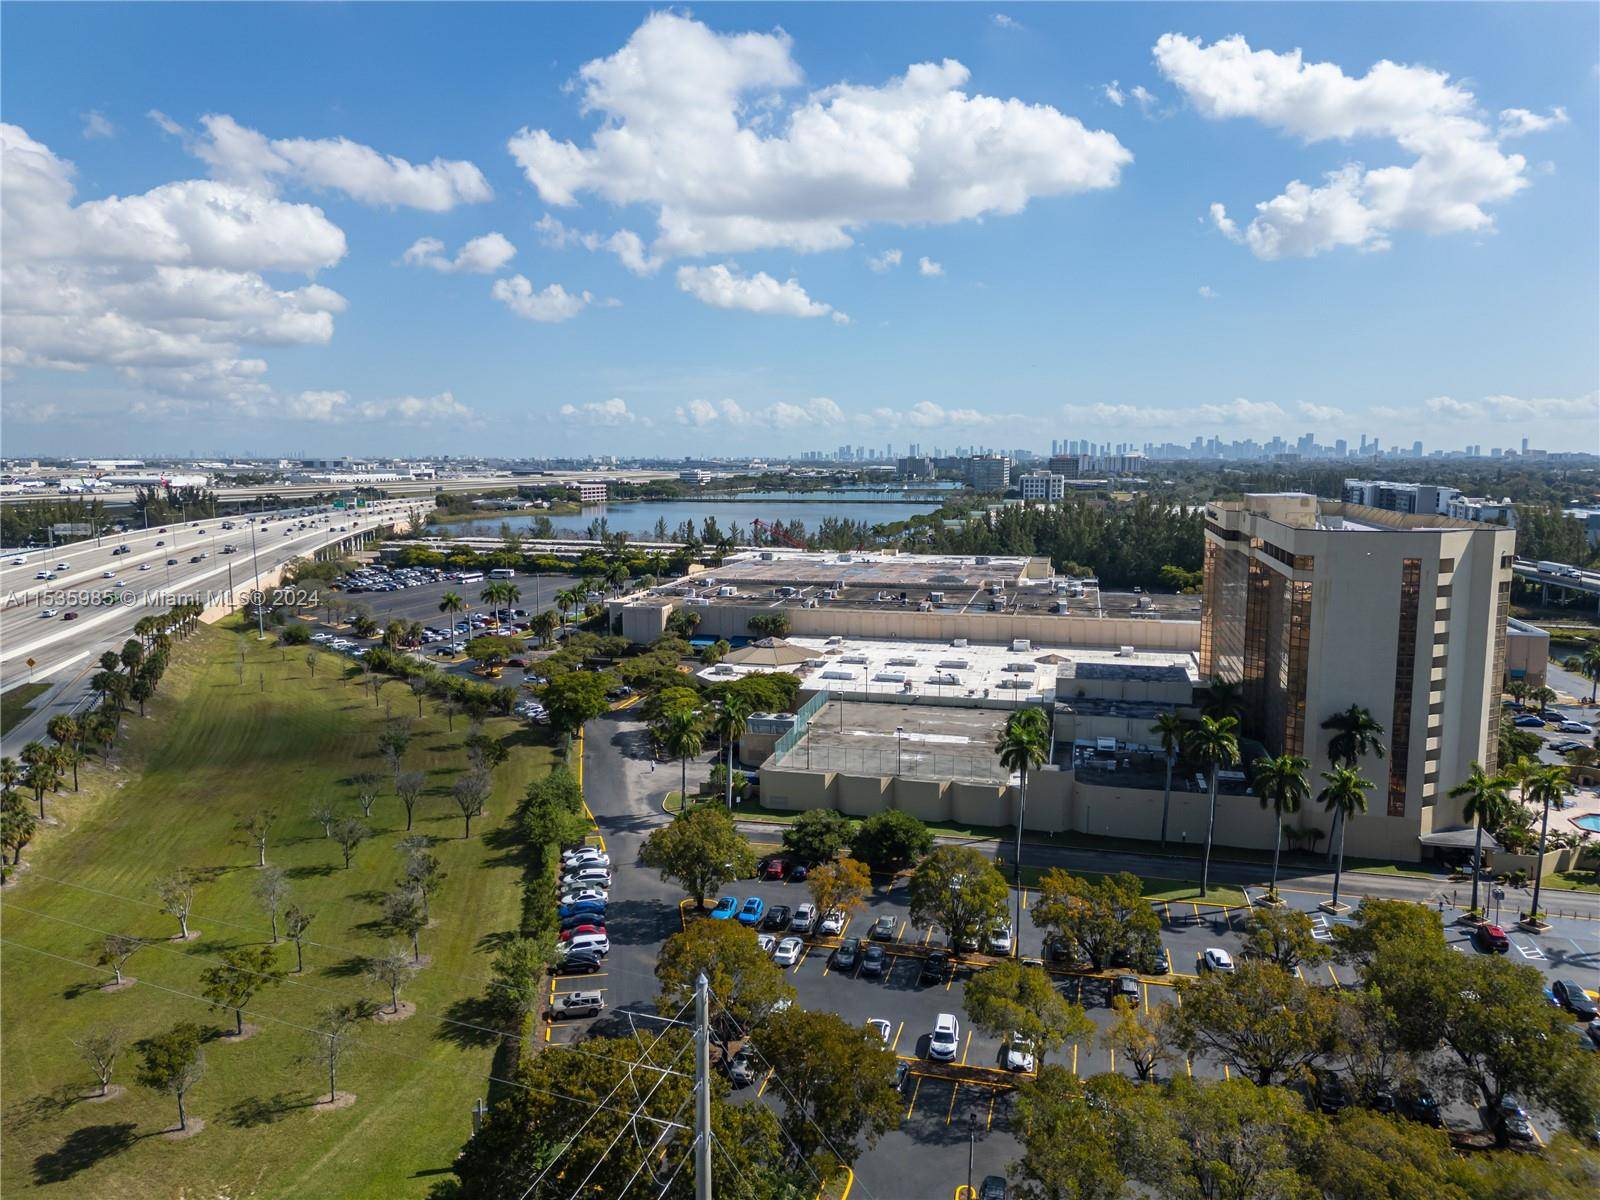 Freshly updated retail, wholesale, export showroom for sale in the famous Miami International Merchandise Mart adjacent to the Double Tree Hotel Convention Ctr.